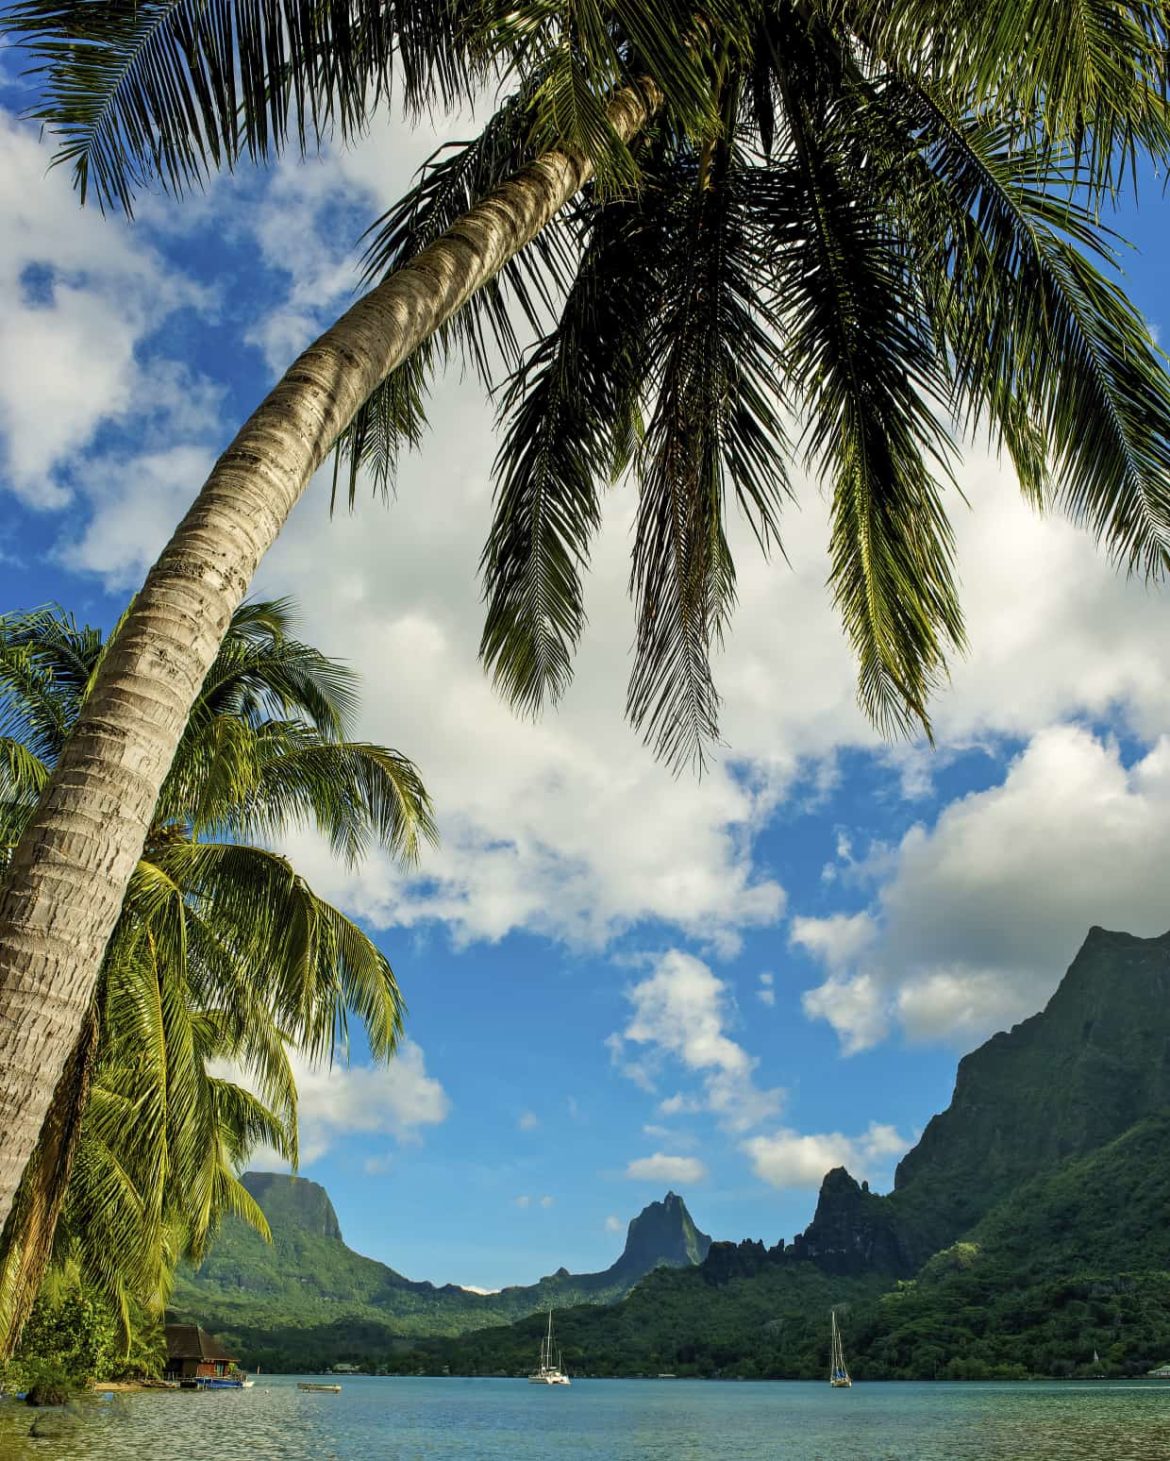 The lush greenery and volcanic mountains of French Polynesia